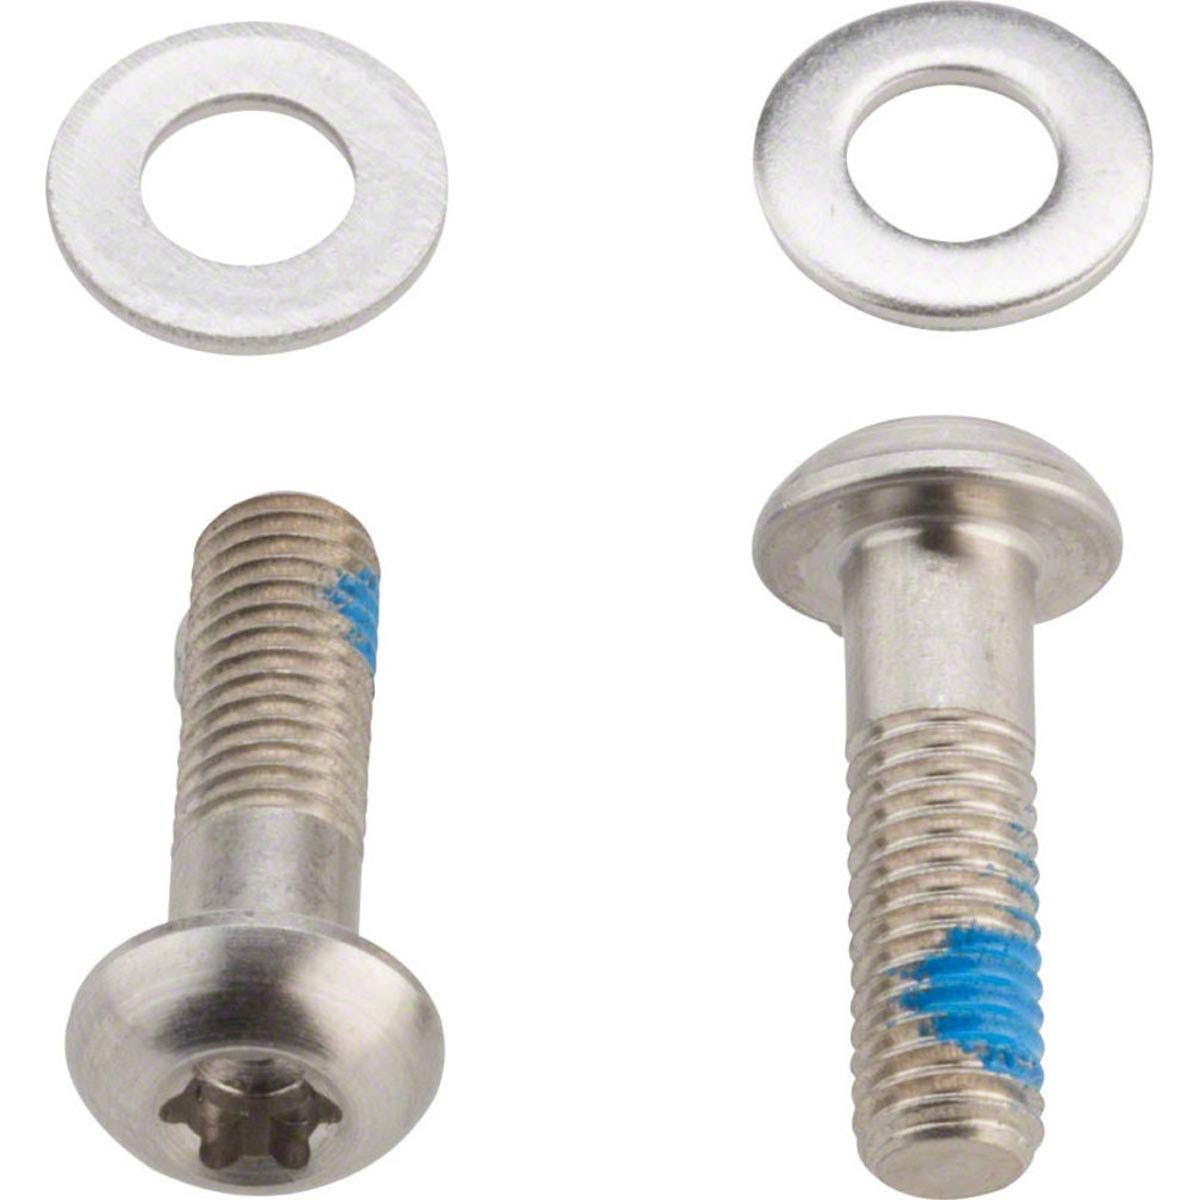 SRAM Cycling Flat Mount Disc Bolts - 17mm, Stainless Steel